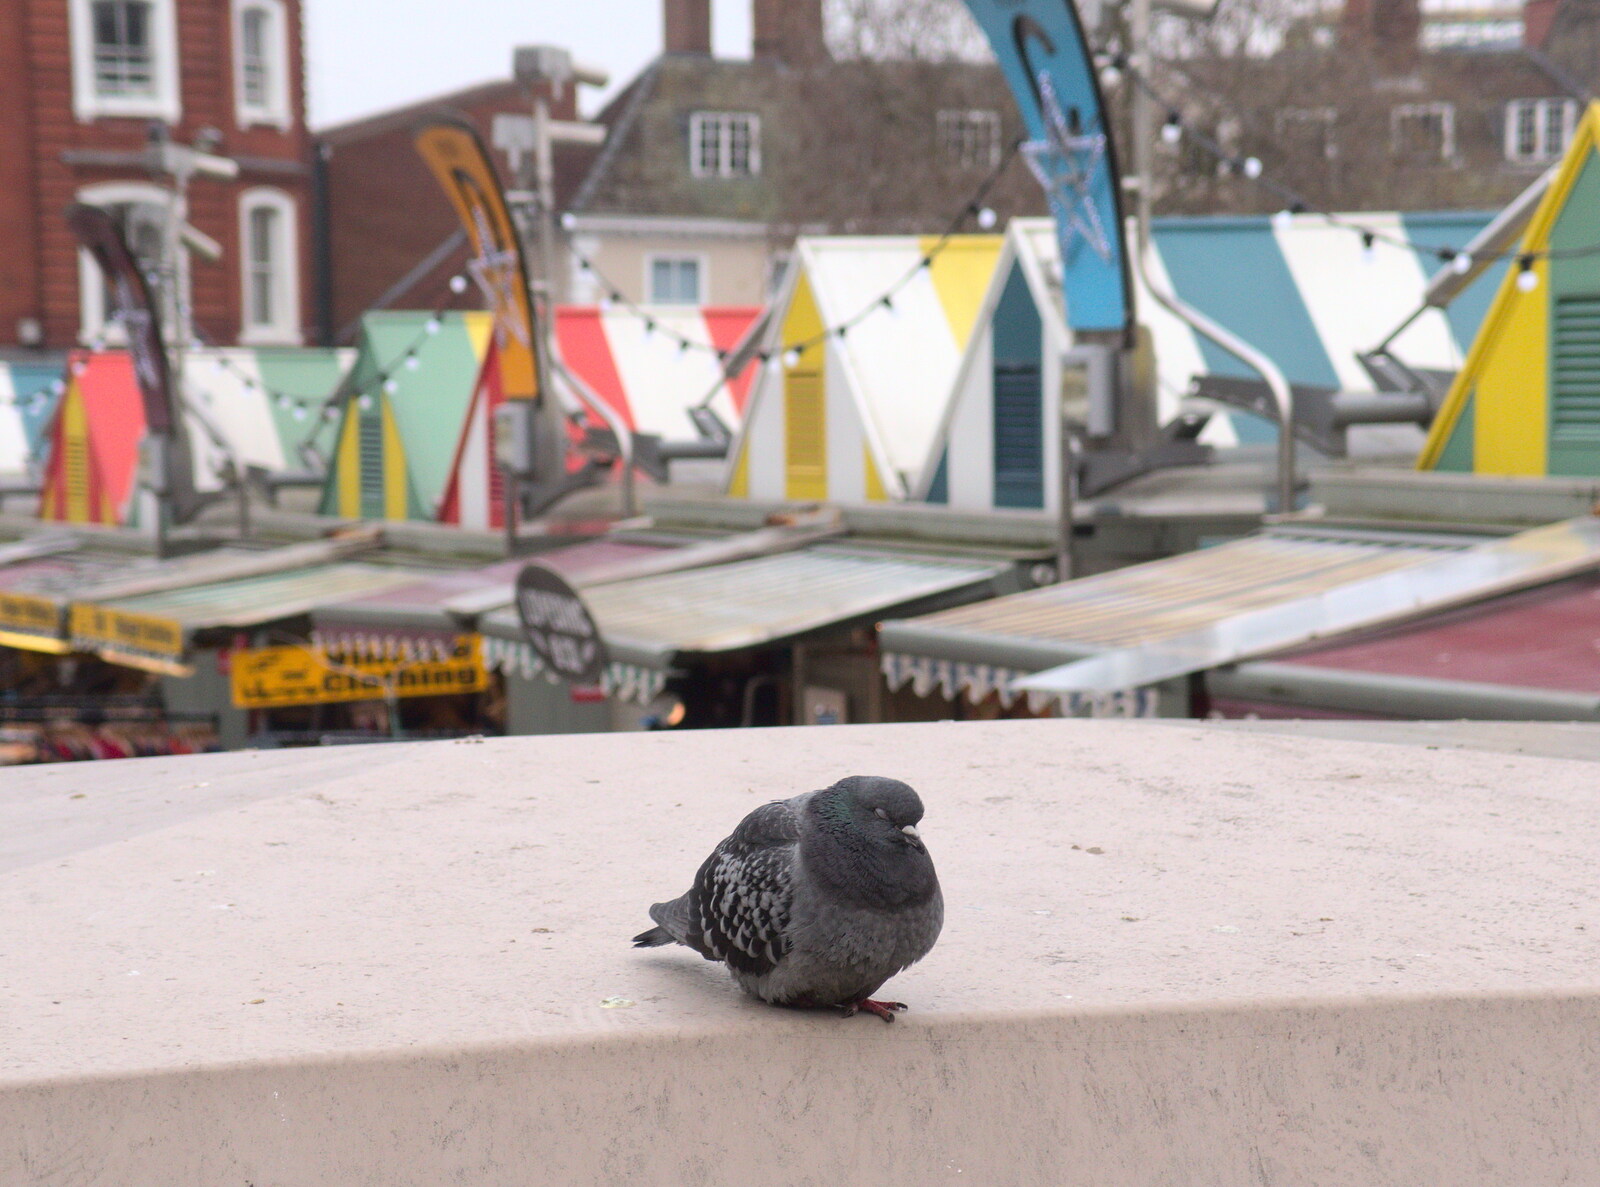 Pigeon-feature! from A Trip to Norwich, and Beers at The Swan Inn, Brome, Suffolk - 5th January 2015